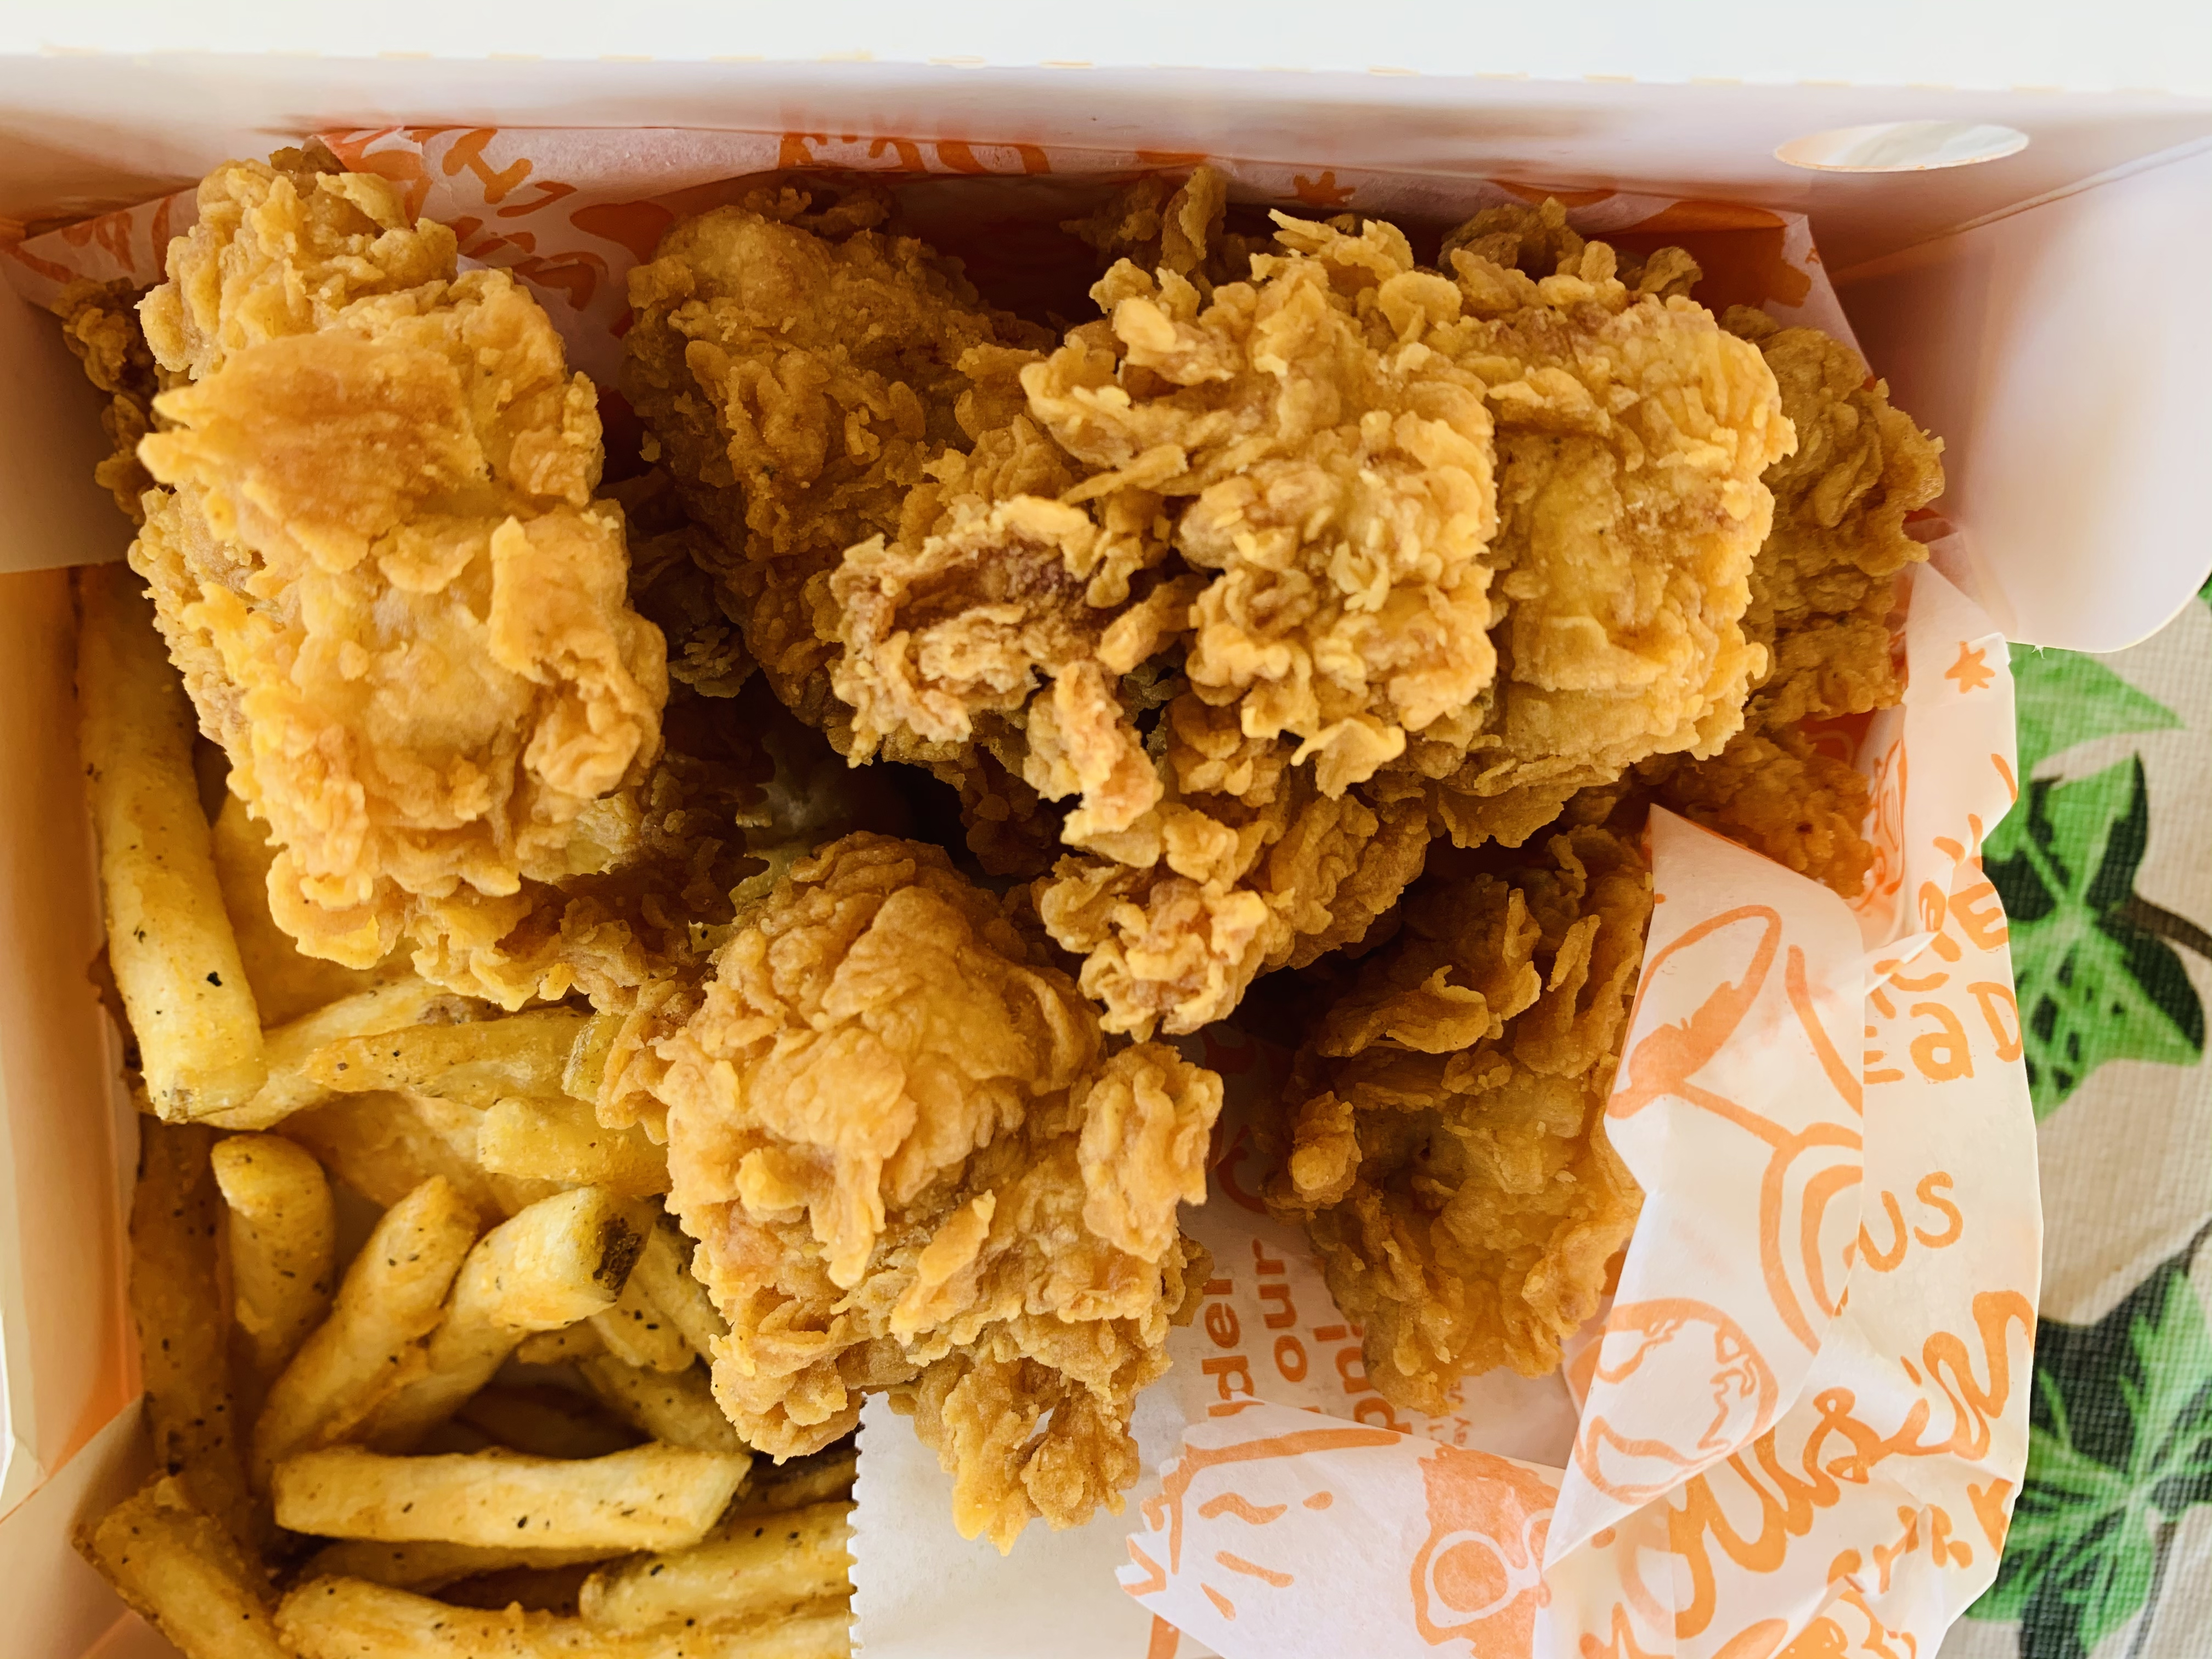 The New Popeyes Chicken Nuggets Have Arrived — Here’s Our Review